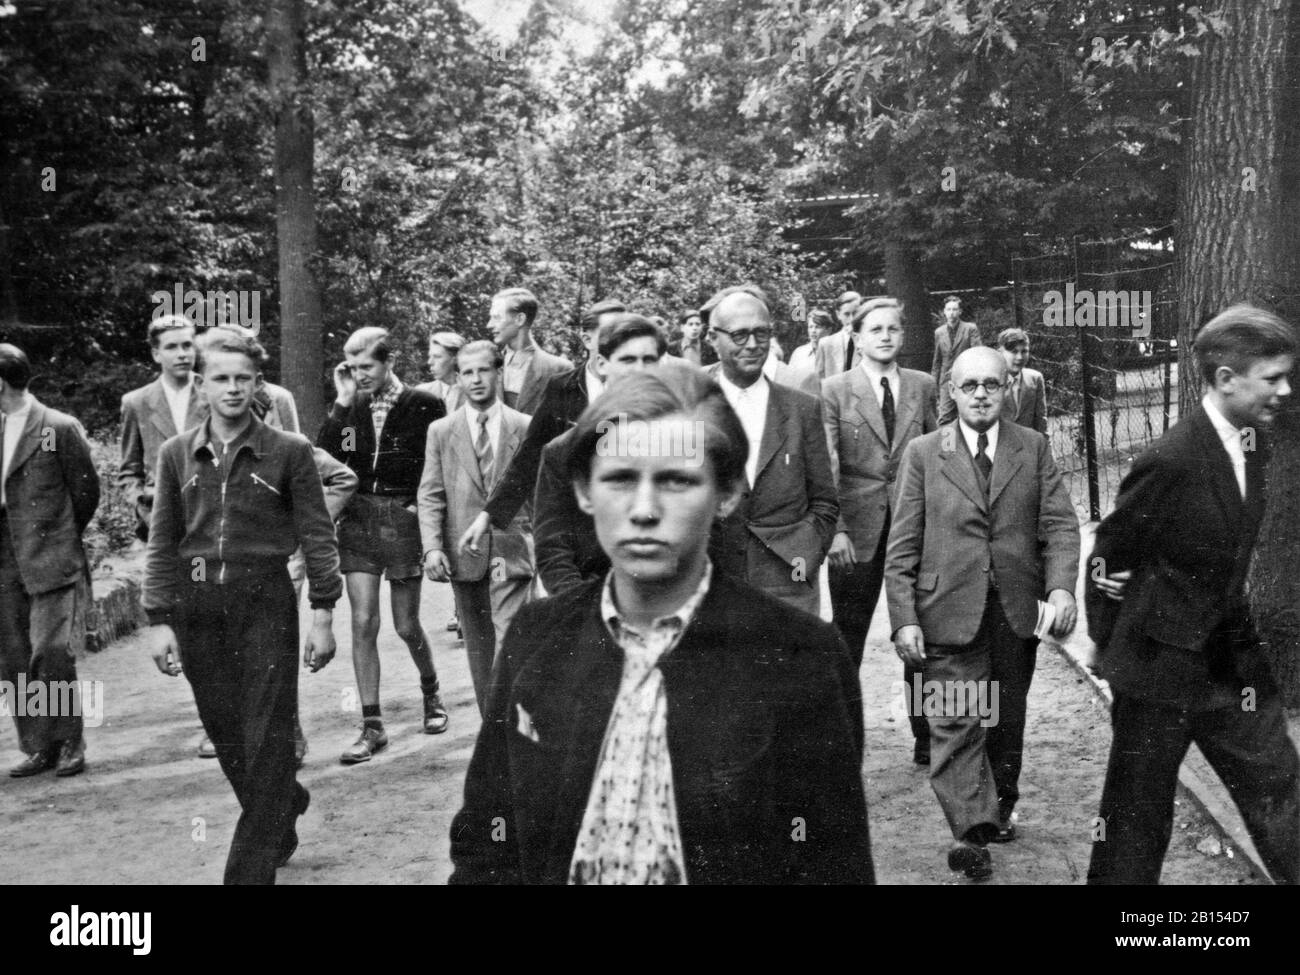 a Vocational School on an excursion, about 1960, North Rhine-Westphalia, Germany Stock Photo